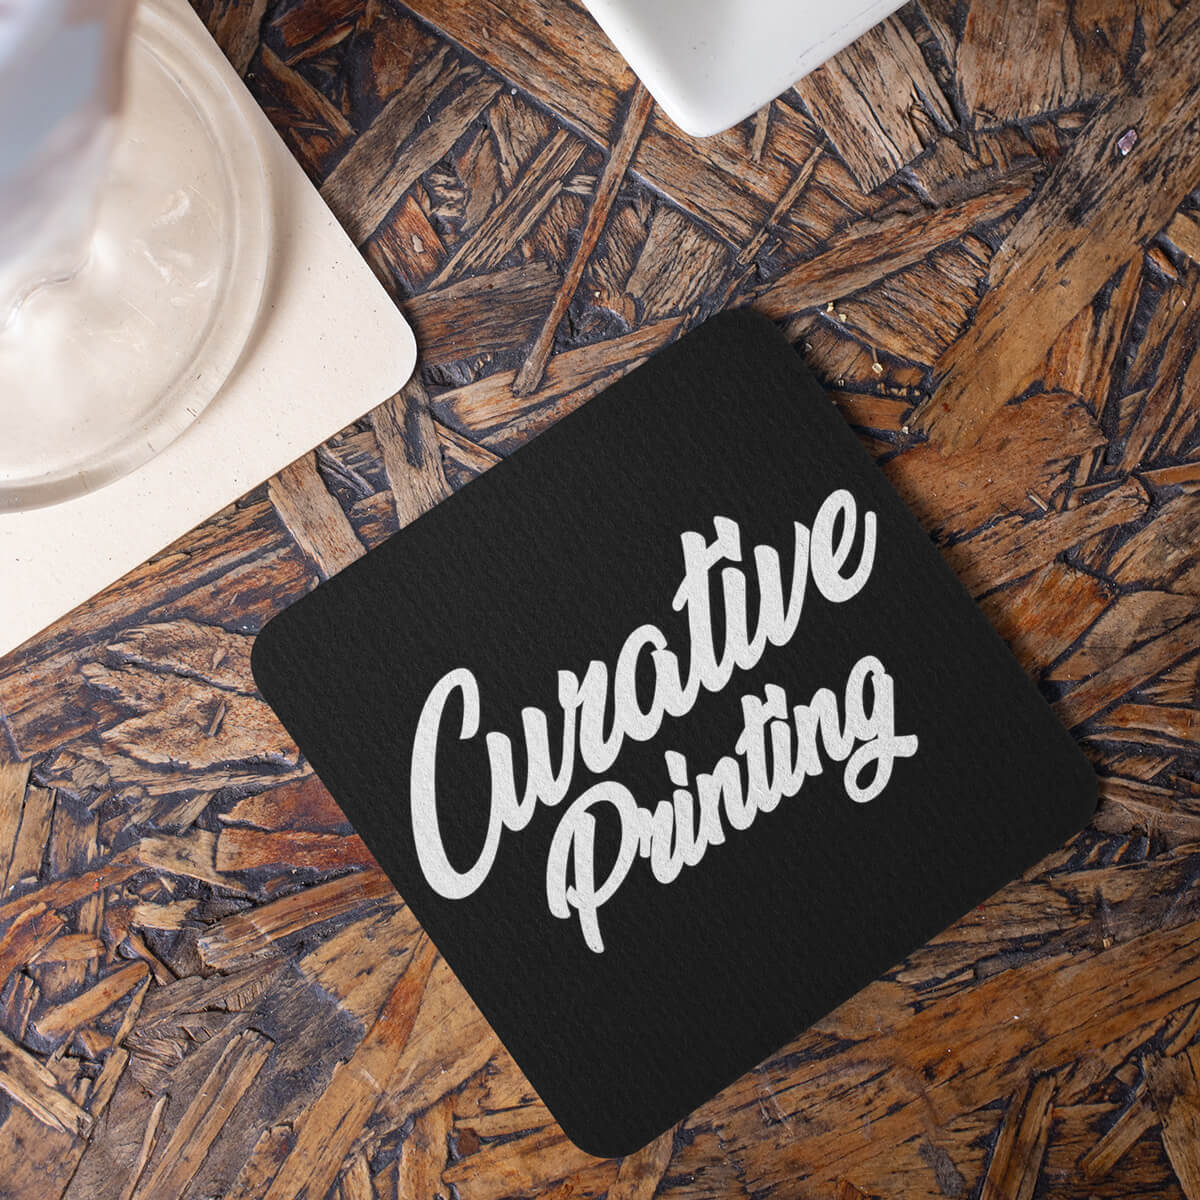 Table top with square black coaster custom promotional drinkware by curative printing